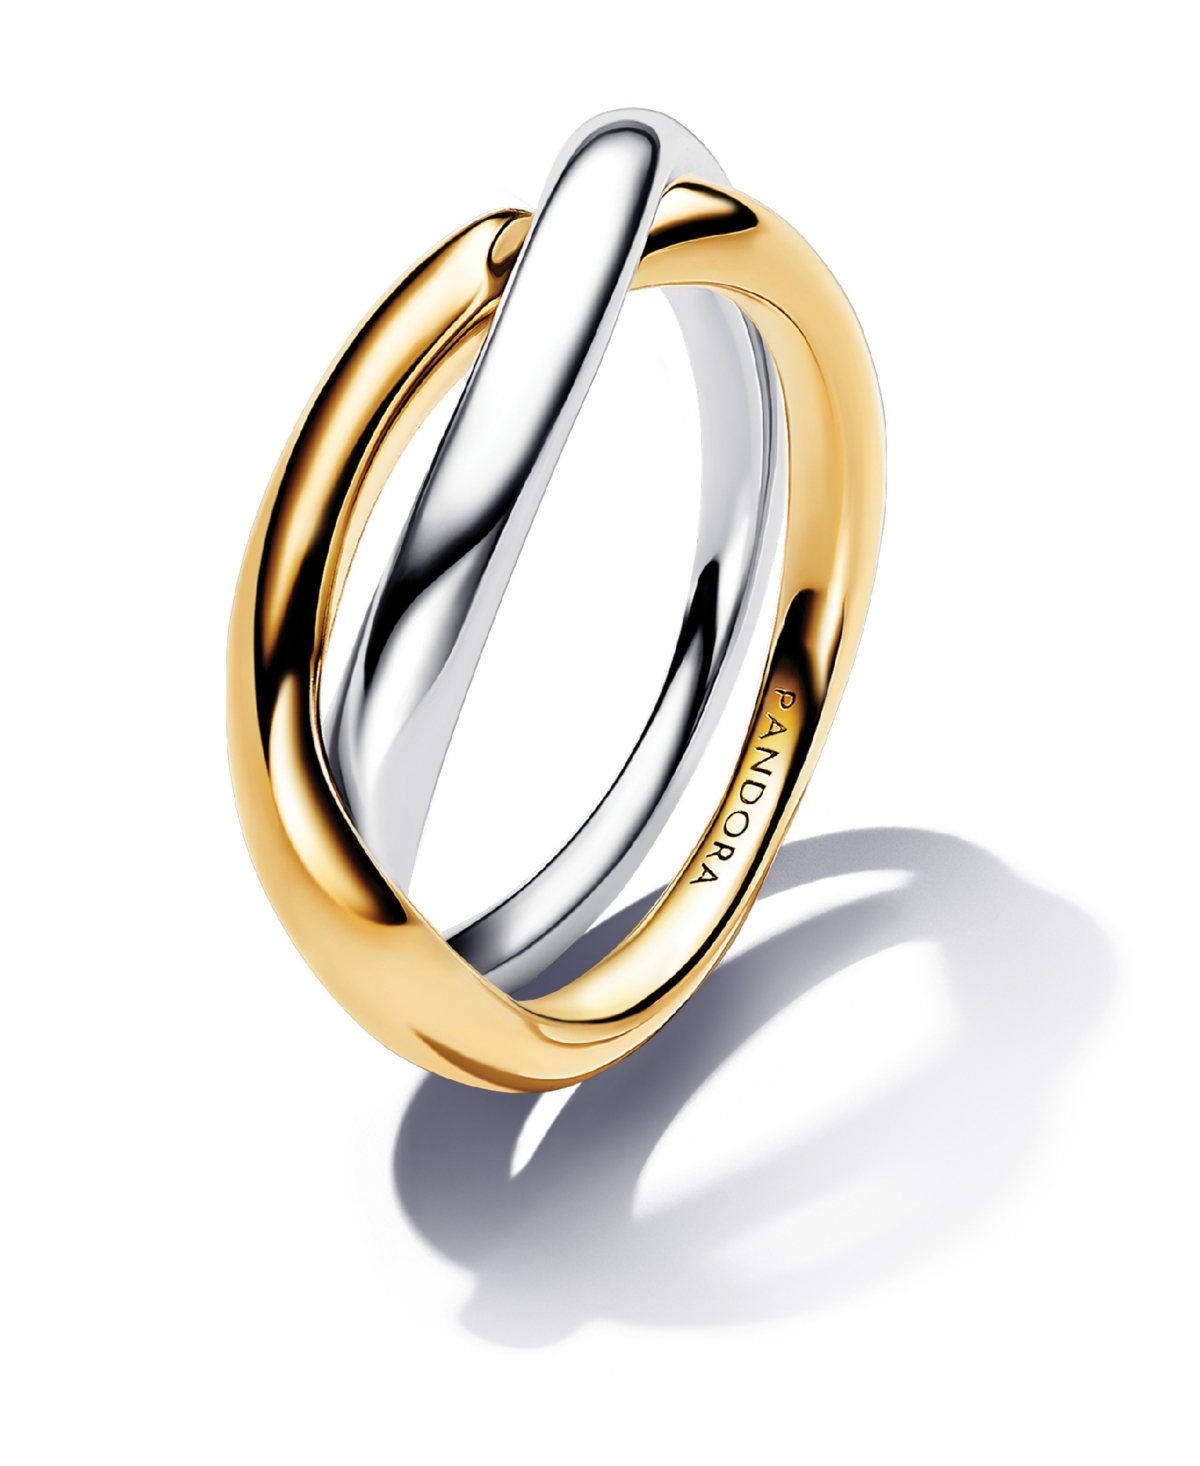 Two-tone Entwined Bands Ring in Sterling Silver and 14k Gold-plated - Silver Gold